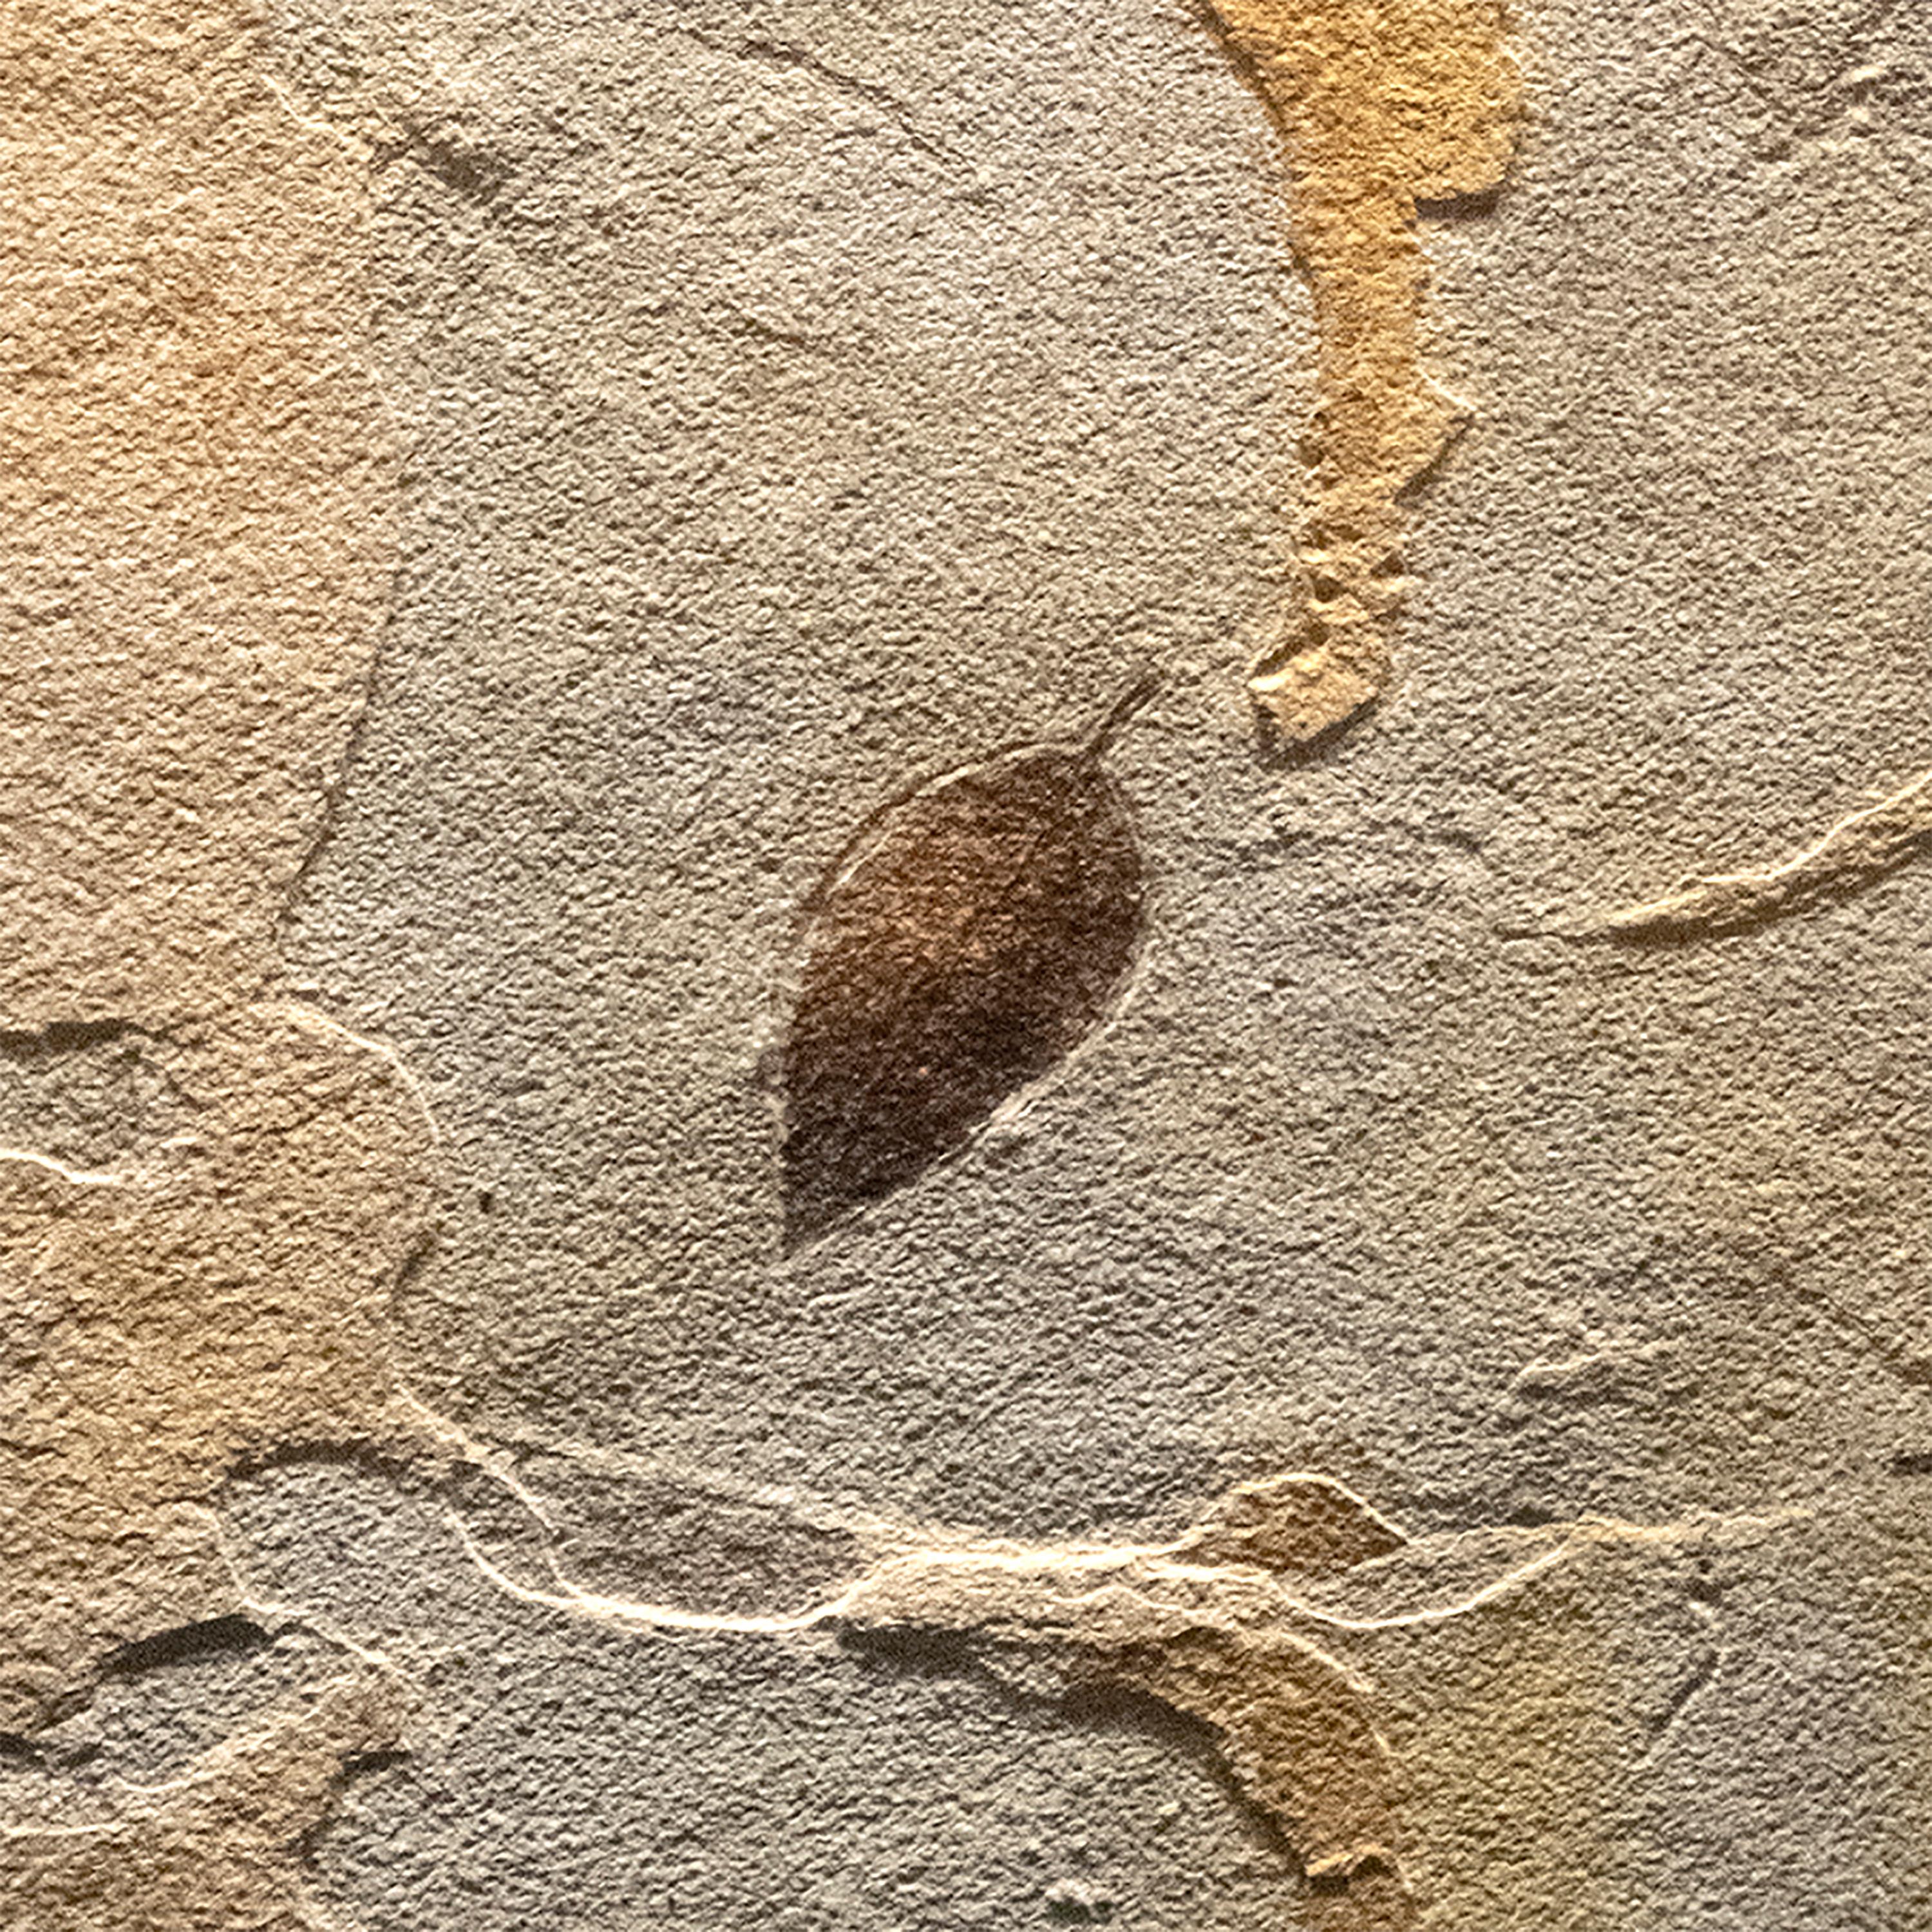 American 50 Million Year Old Fossil Leaf & Branch Diptych Mural in Stone, from Wyoming